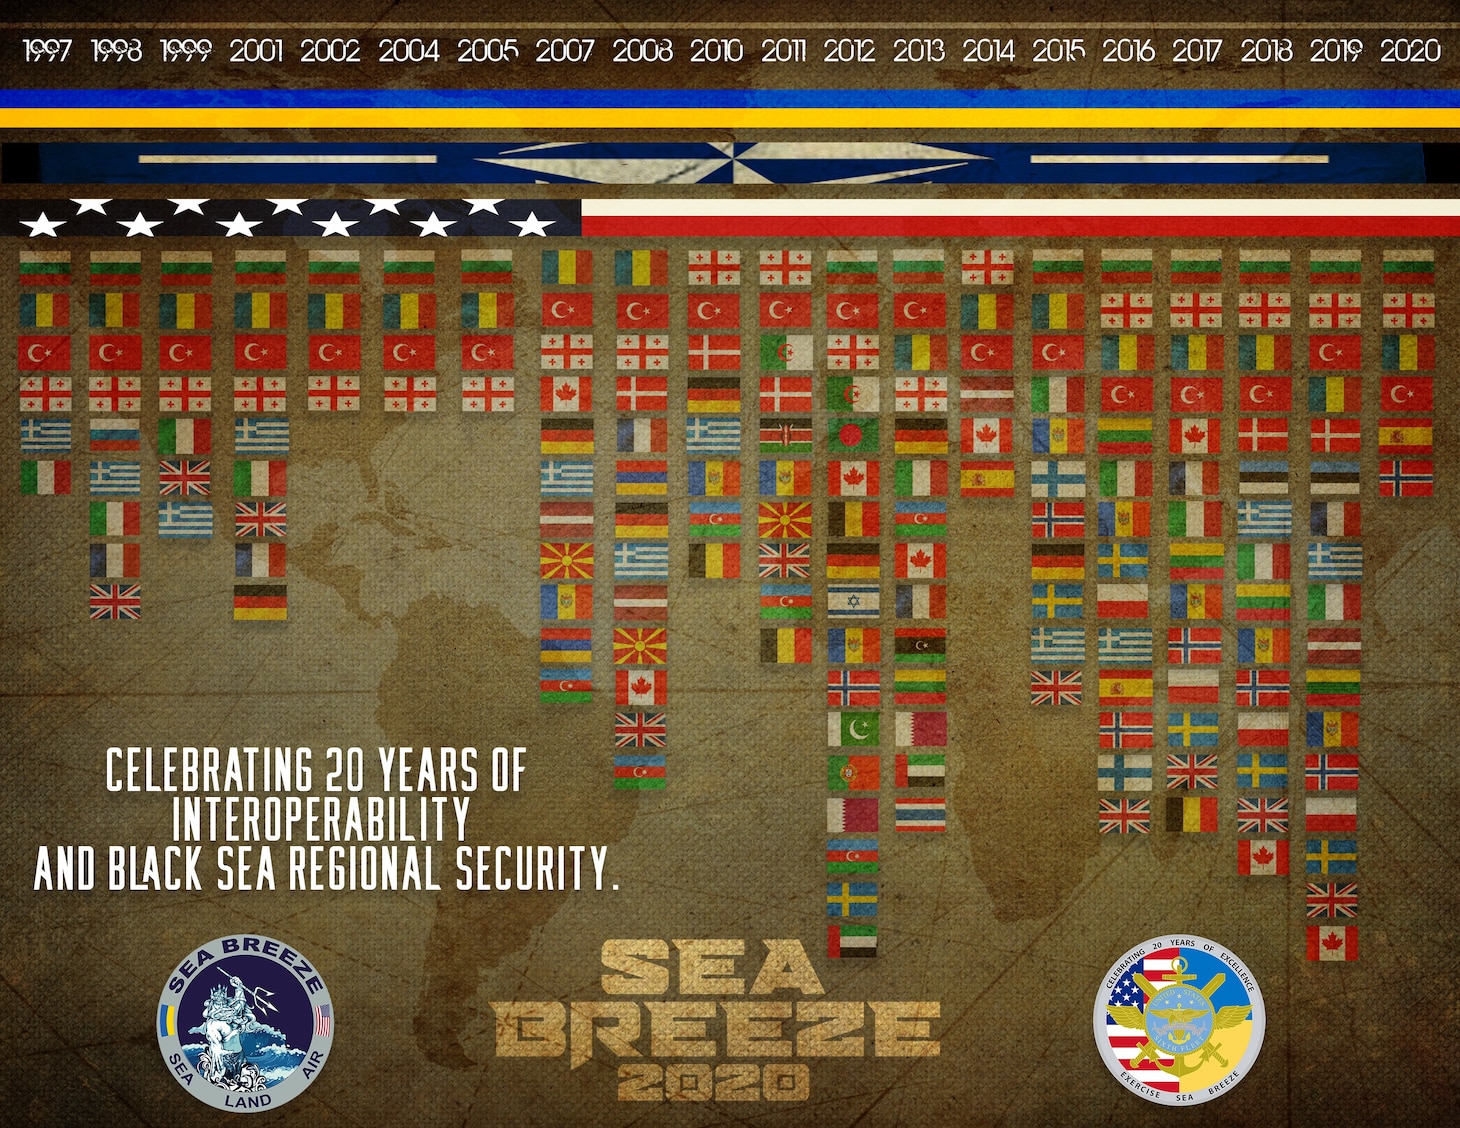 200724-N-OZ224-0001 BLACK SEA (July 24, 2020) Historical graphic of participating nations in exercise Sea Breeze since 1997. Sea Breeze is an annual U.S.-Ukrainian co-hosted exercise designed to enhance interoperability between participating nations and strengthen regional security.  (U.S. Navy illustration by Mass Communication Specialist 2nd Class Brandon Vinson/Released)